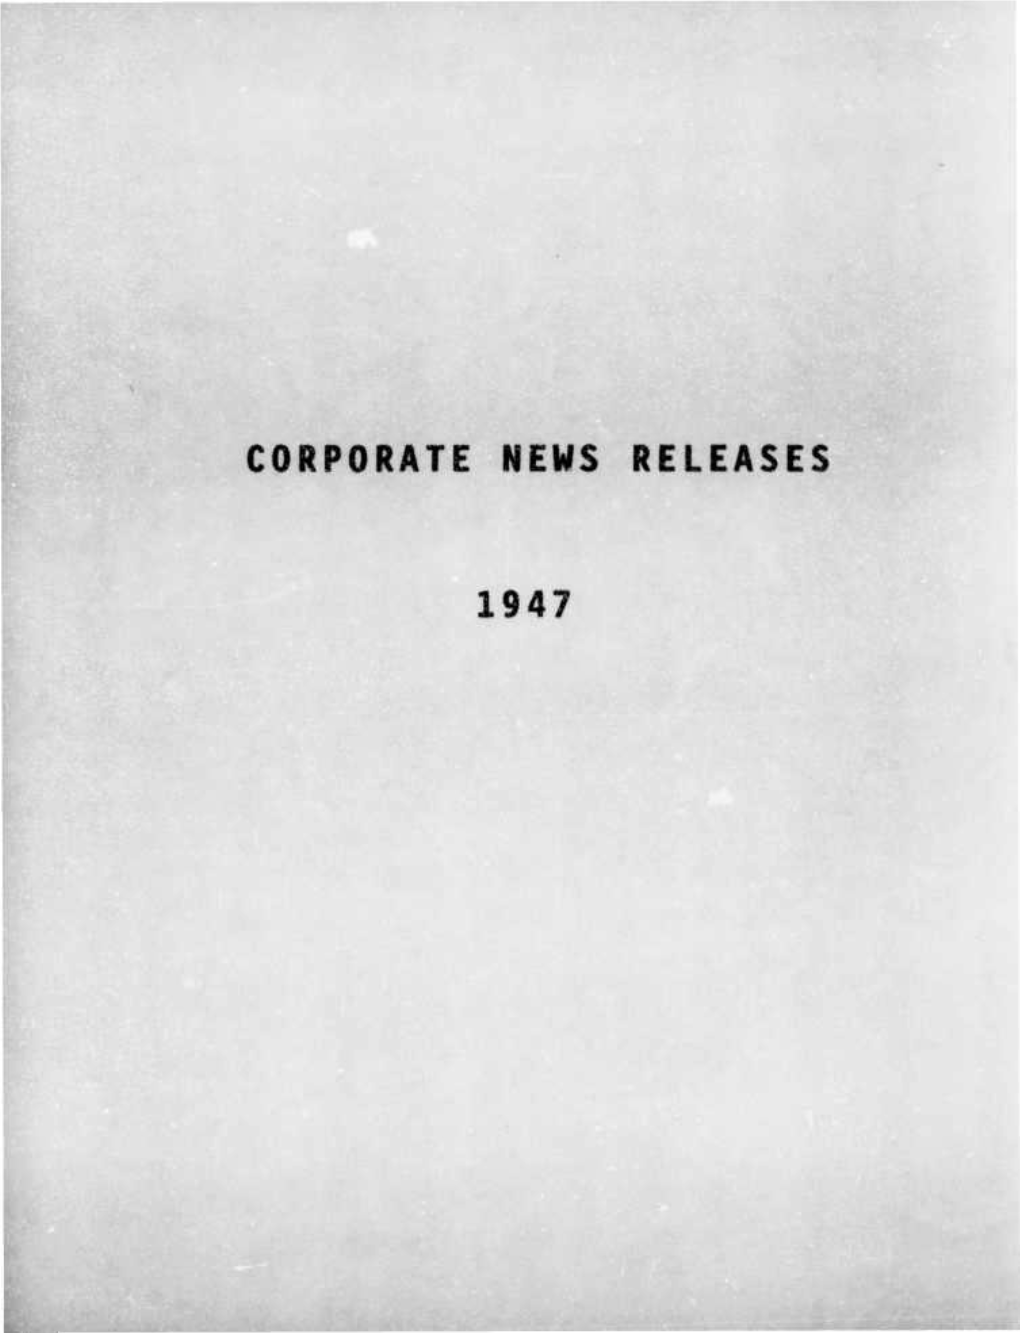 Corporate News Releases 1947